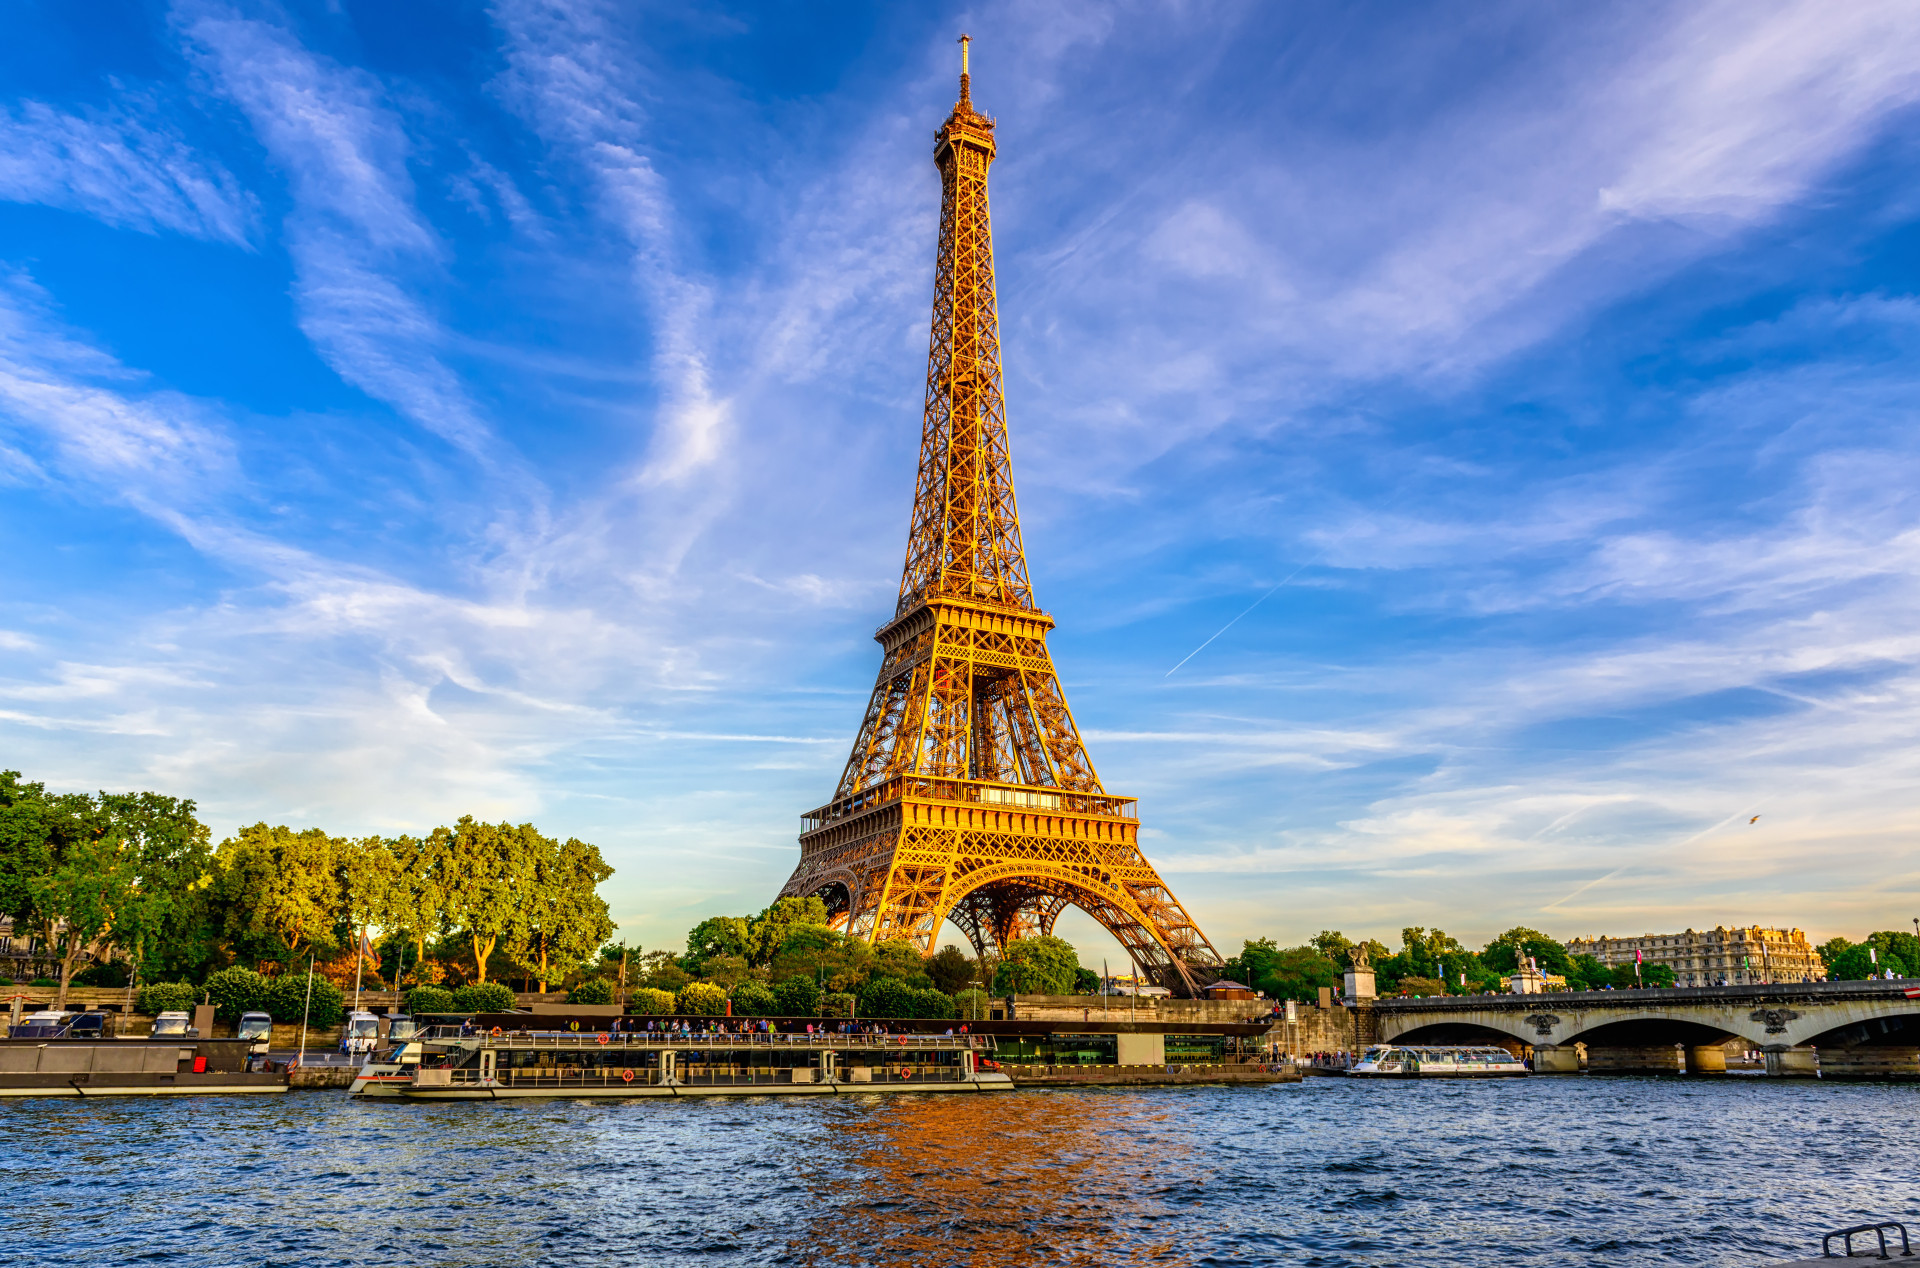 Paris being one of the world's most charming cities won't be news to anyone. Walking along the River Seine up to the Eiffel Tower is a must.<p><a href="https://www.msn.com/en-sg/community/channel/vid-7xx8mnucu55yw63we9va2gwr7uihbxwc68fxqp25x6tg4ftibpra?cvid=94631541bc0f4f89bfd59158d696ad7e">Follow us and access great exclusive content every day</a></p>